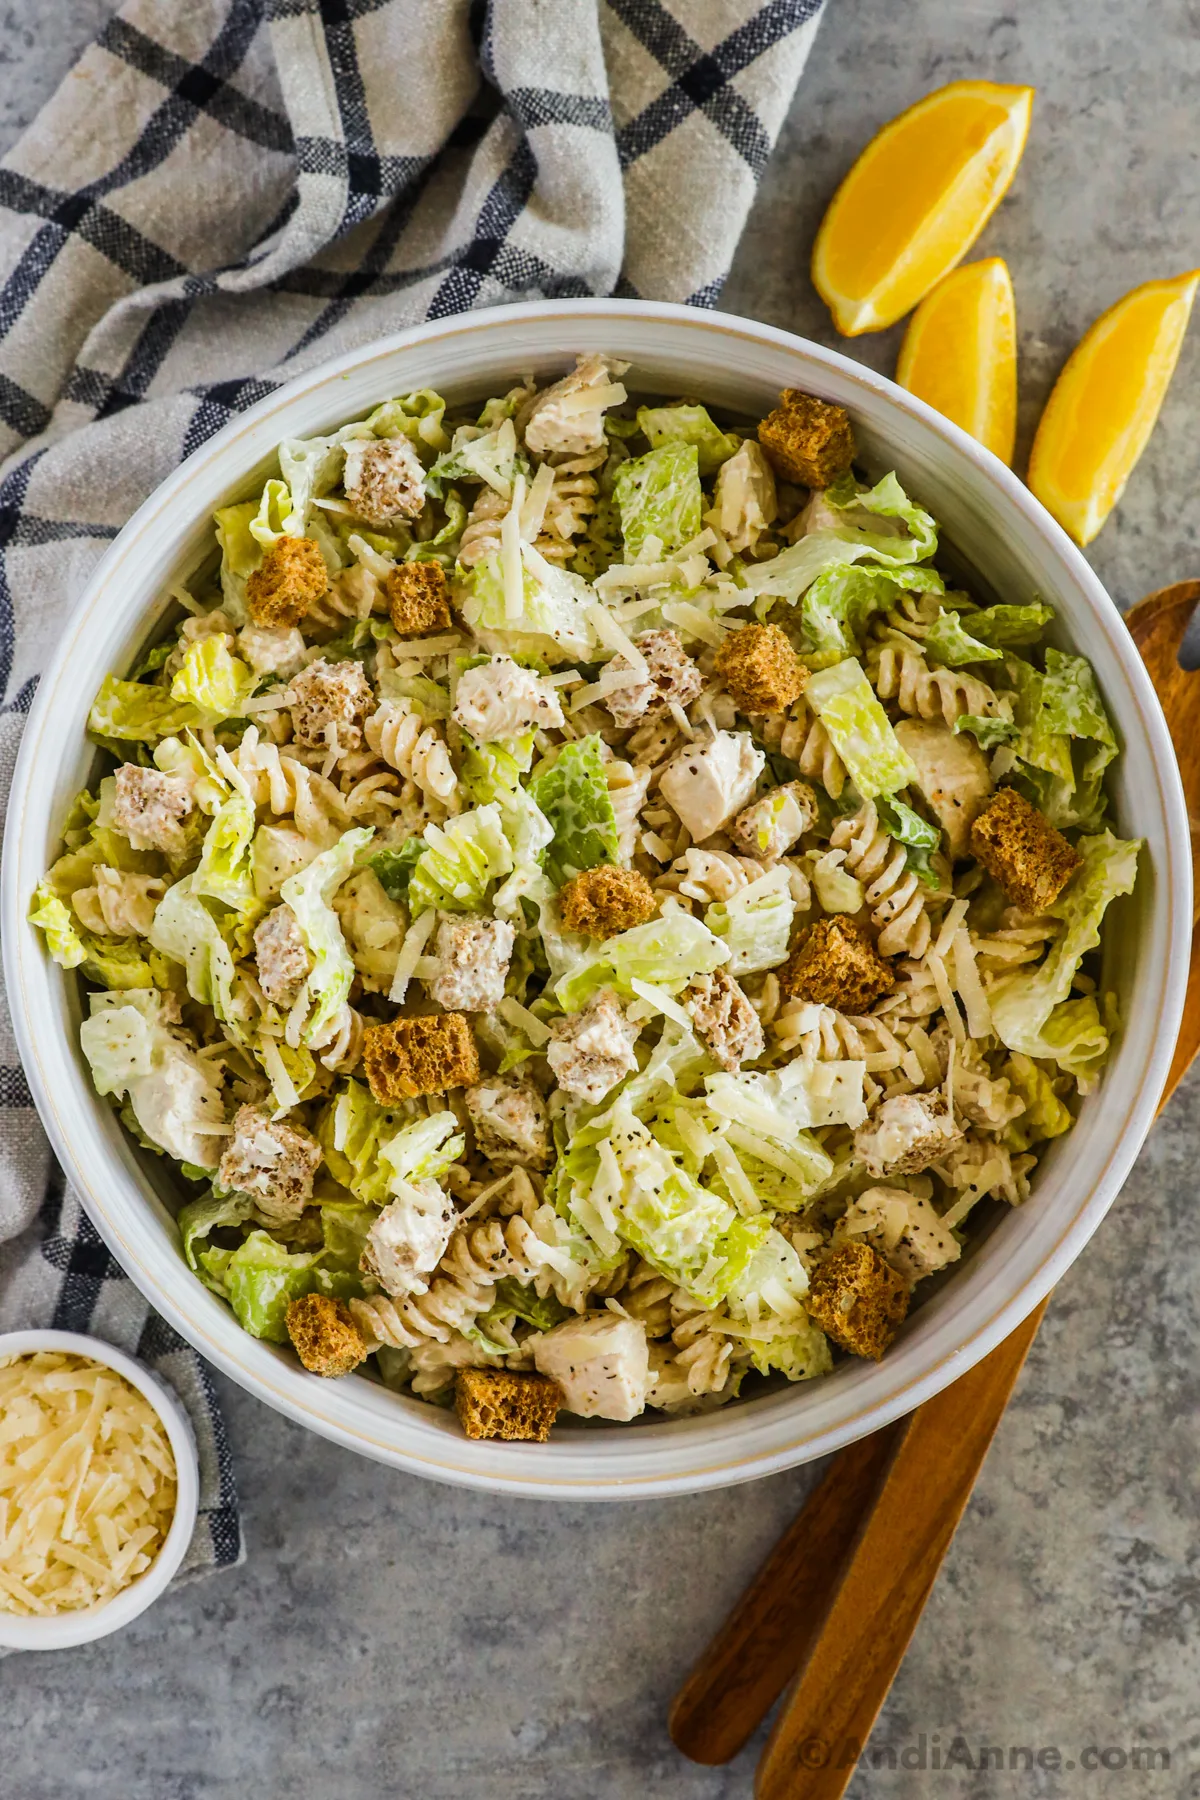 A bowl of creamy chicken pasta salad with croutons, rotini pasta, chopped chicken and lettuce.